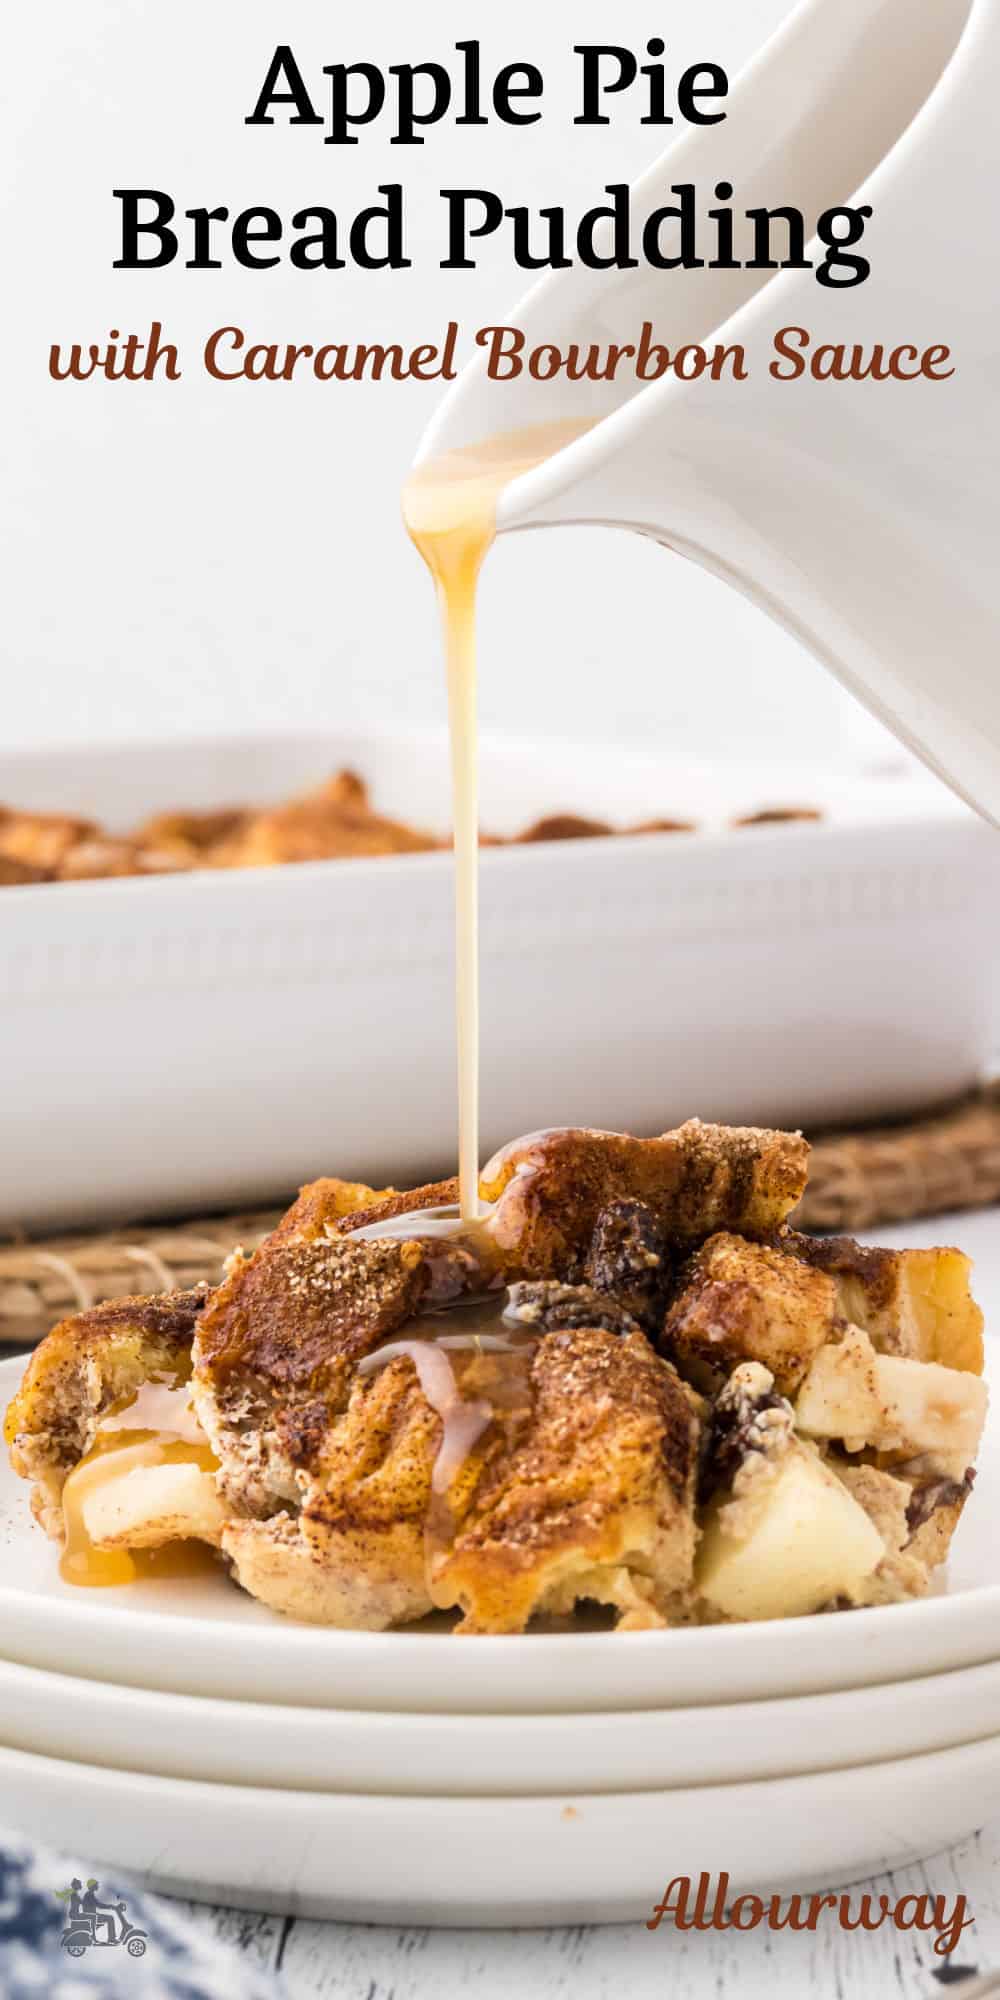 Apple pie gets a brilliant makeover in this delectable creation! Picture velvety brioche bread pudding infused with warm apple pie spices, generously coated in a luxurious caramel bourbon sauce. Once you try this mouthwatering treat, you'll never look at apple pie the same way again!